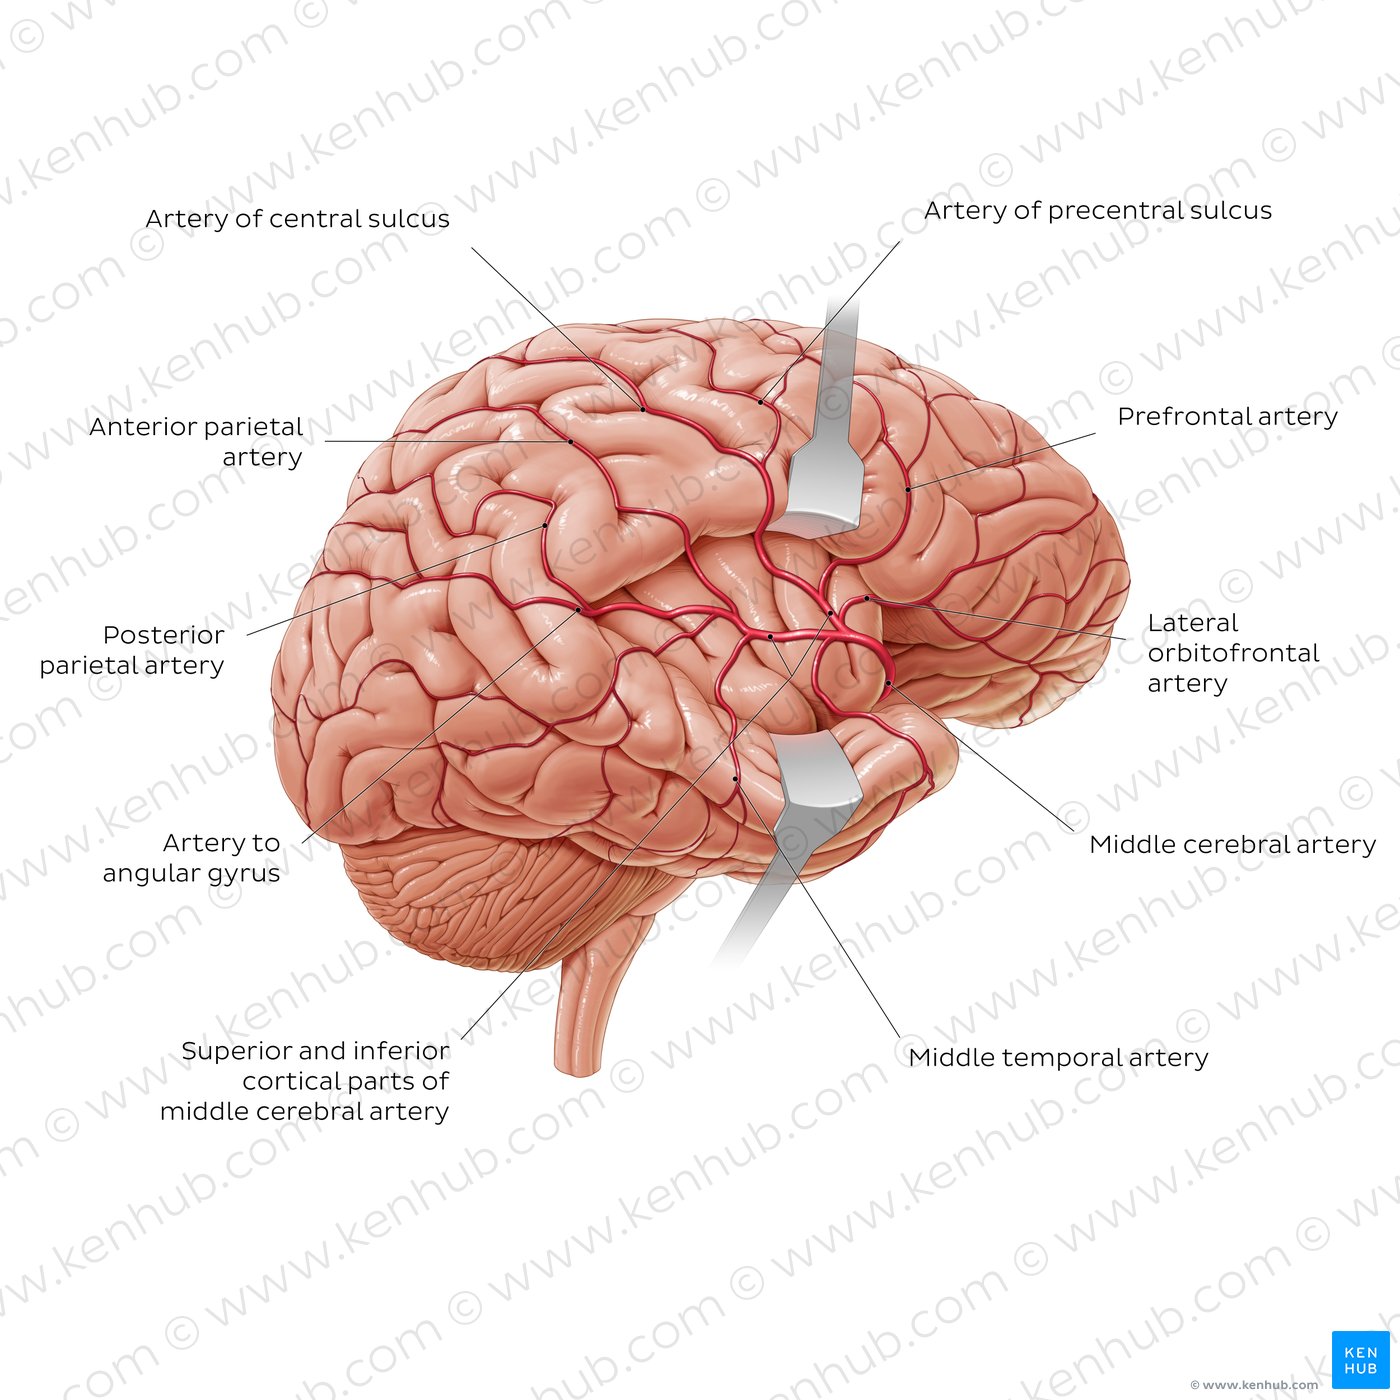 Branches of the middle cerebral artery (diagram)